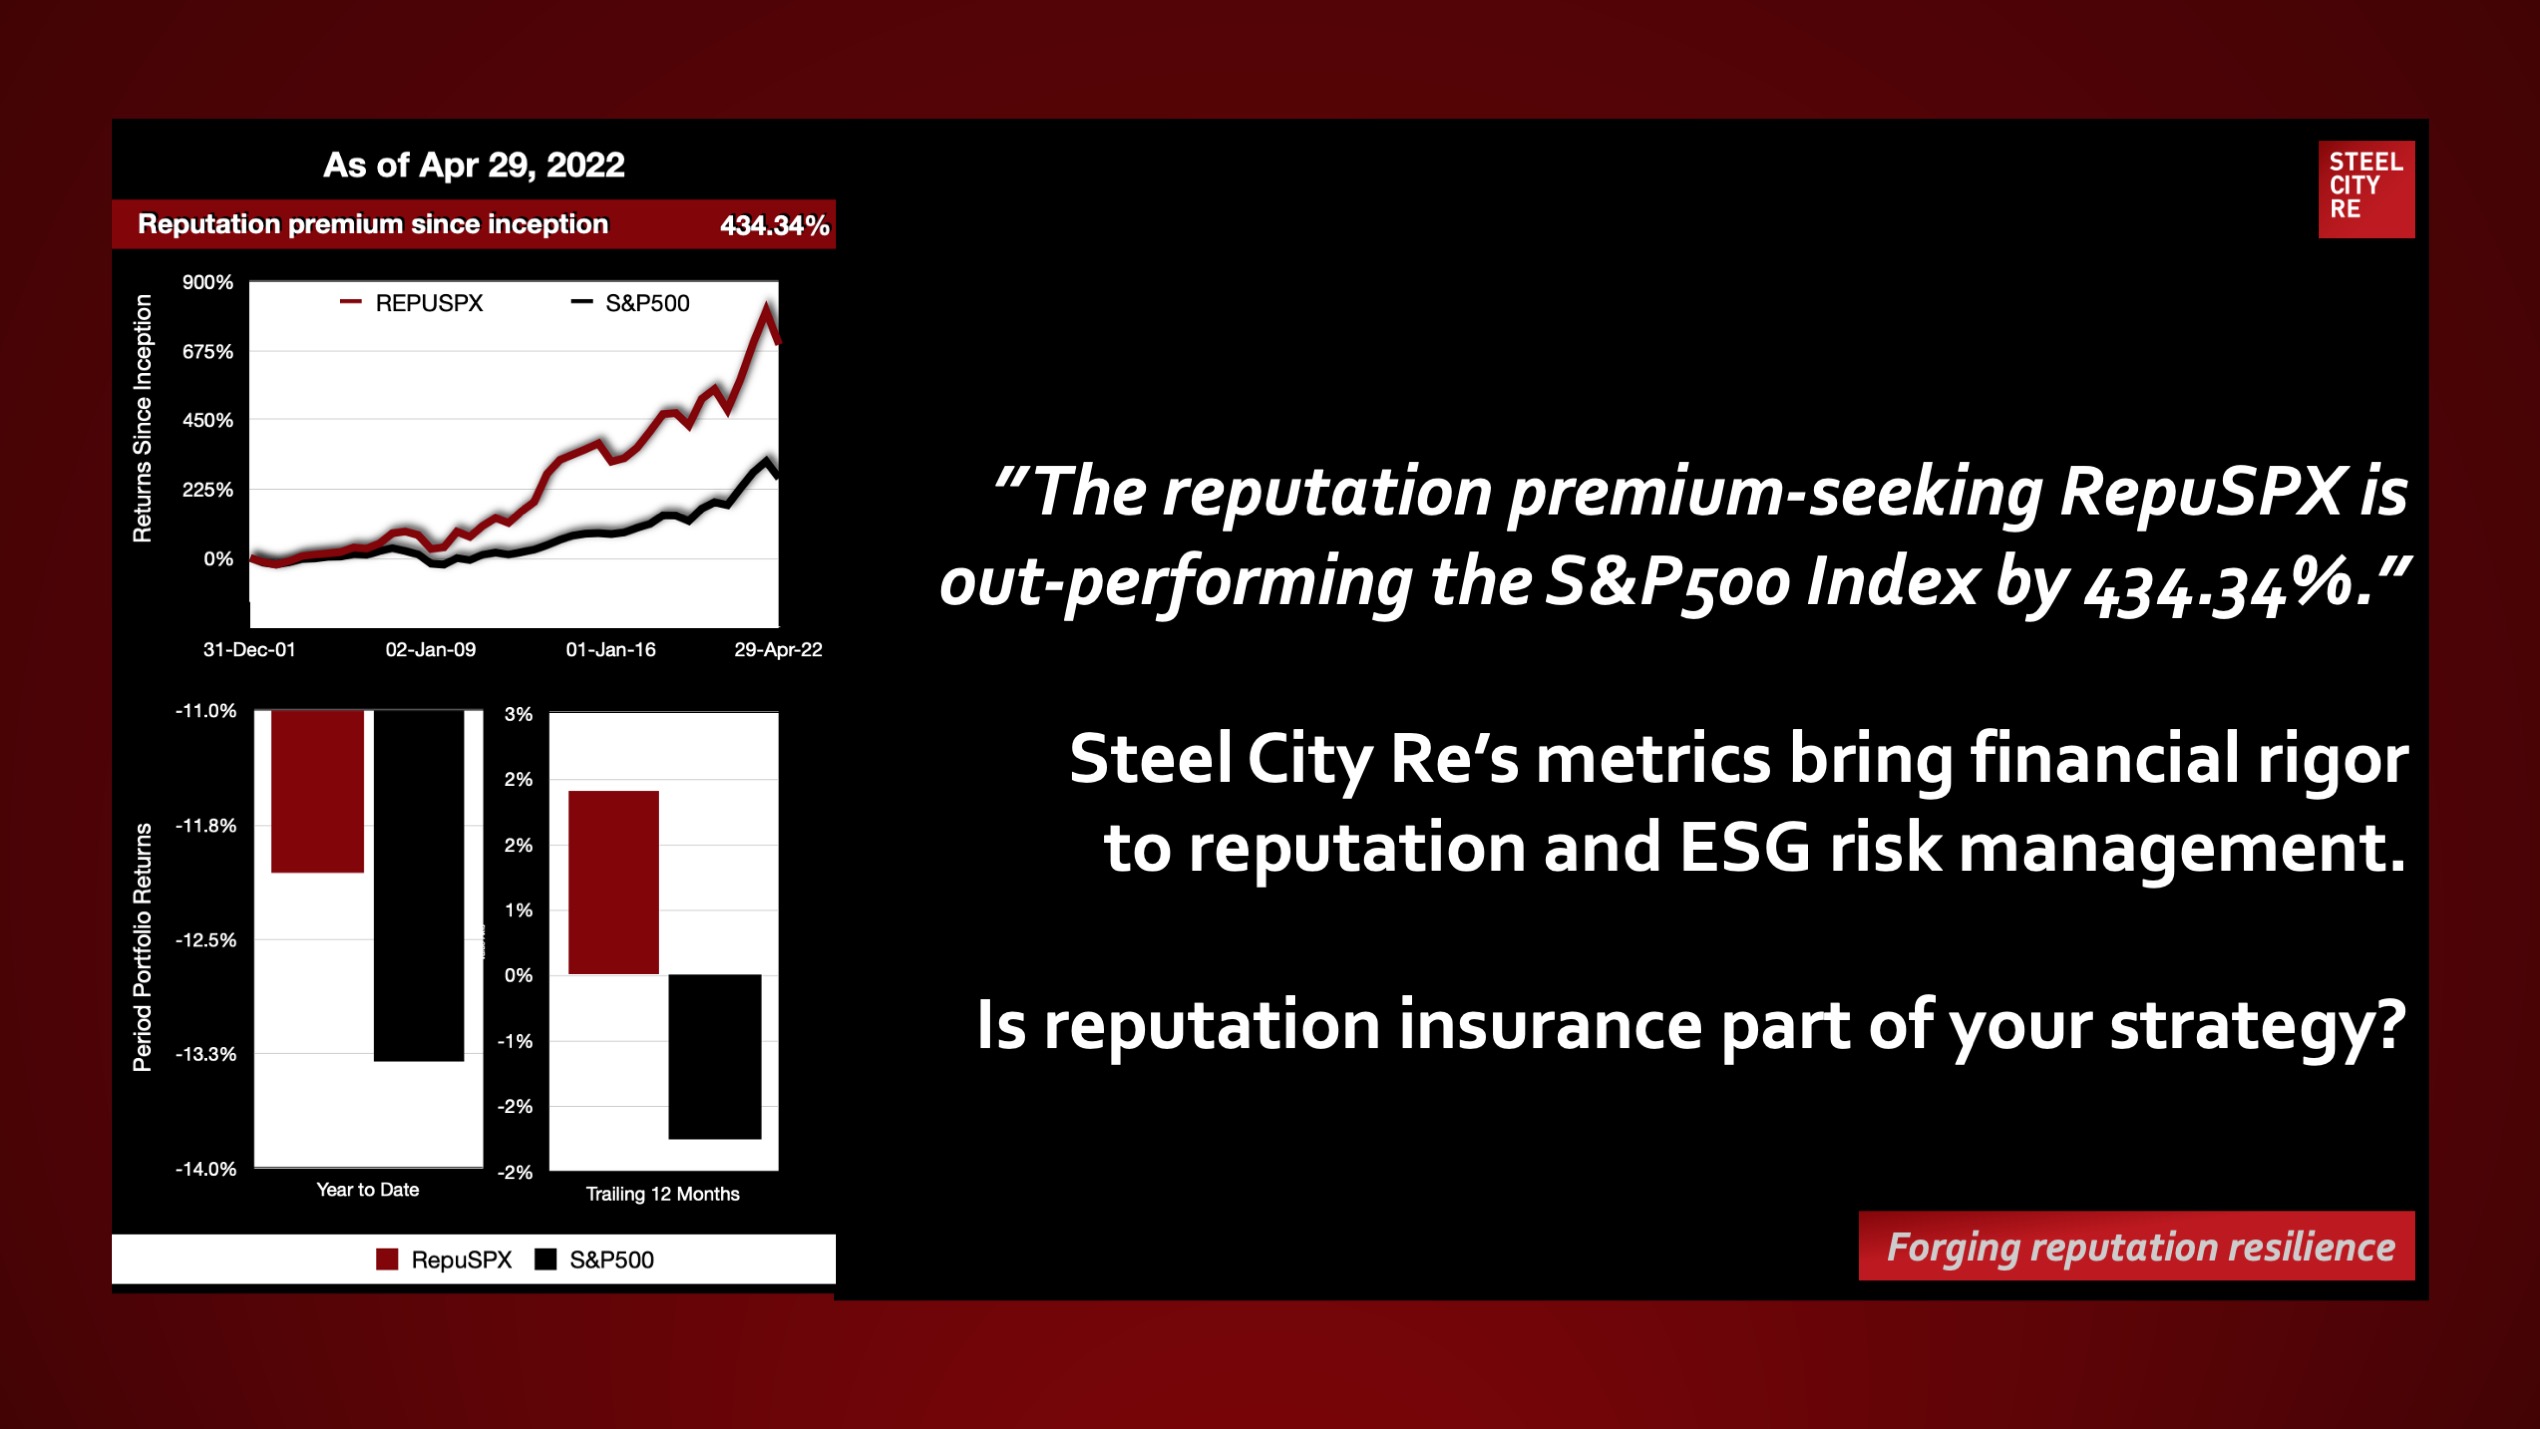 Reputation value is a strategic power. Companies harness their reputation to sell more, faster, and at premium prices; and to obtain labor, vendor services, as well as capital on preferred terms. - Steel City Re RepuSPX 5 May 22